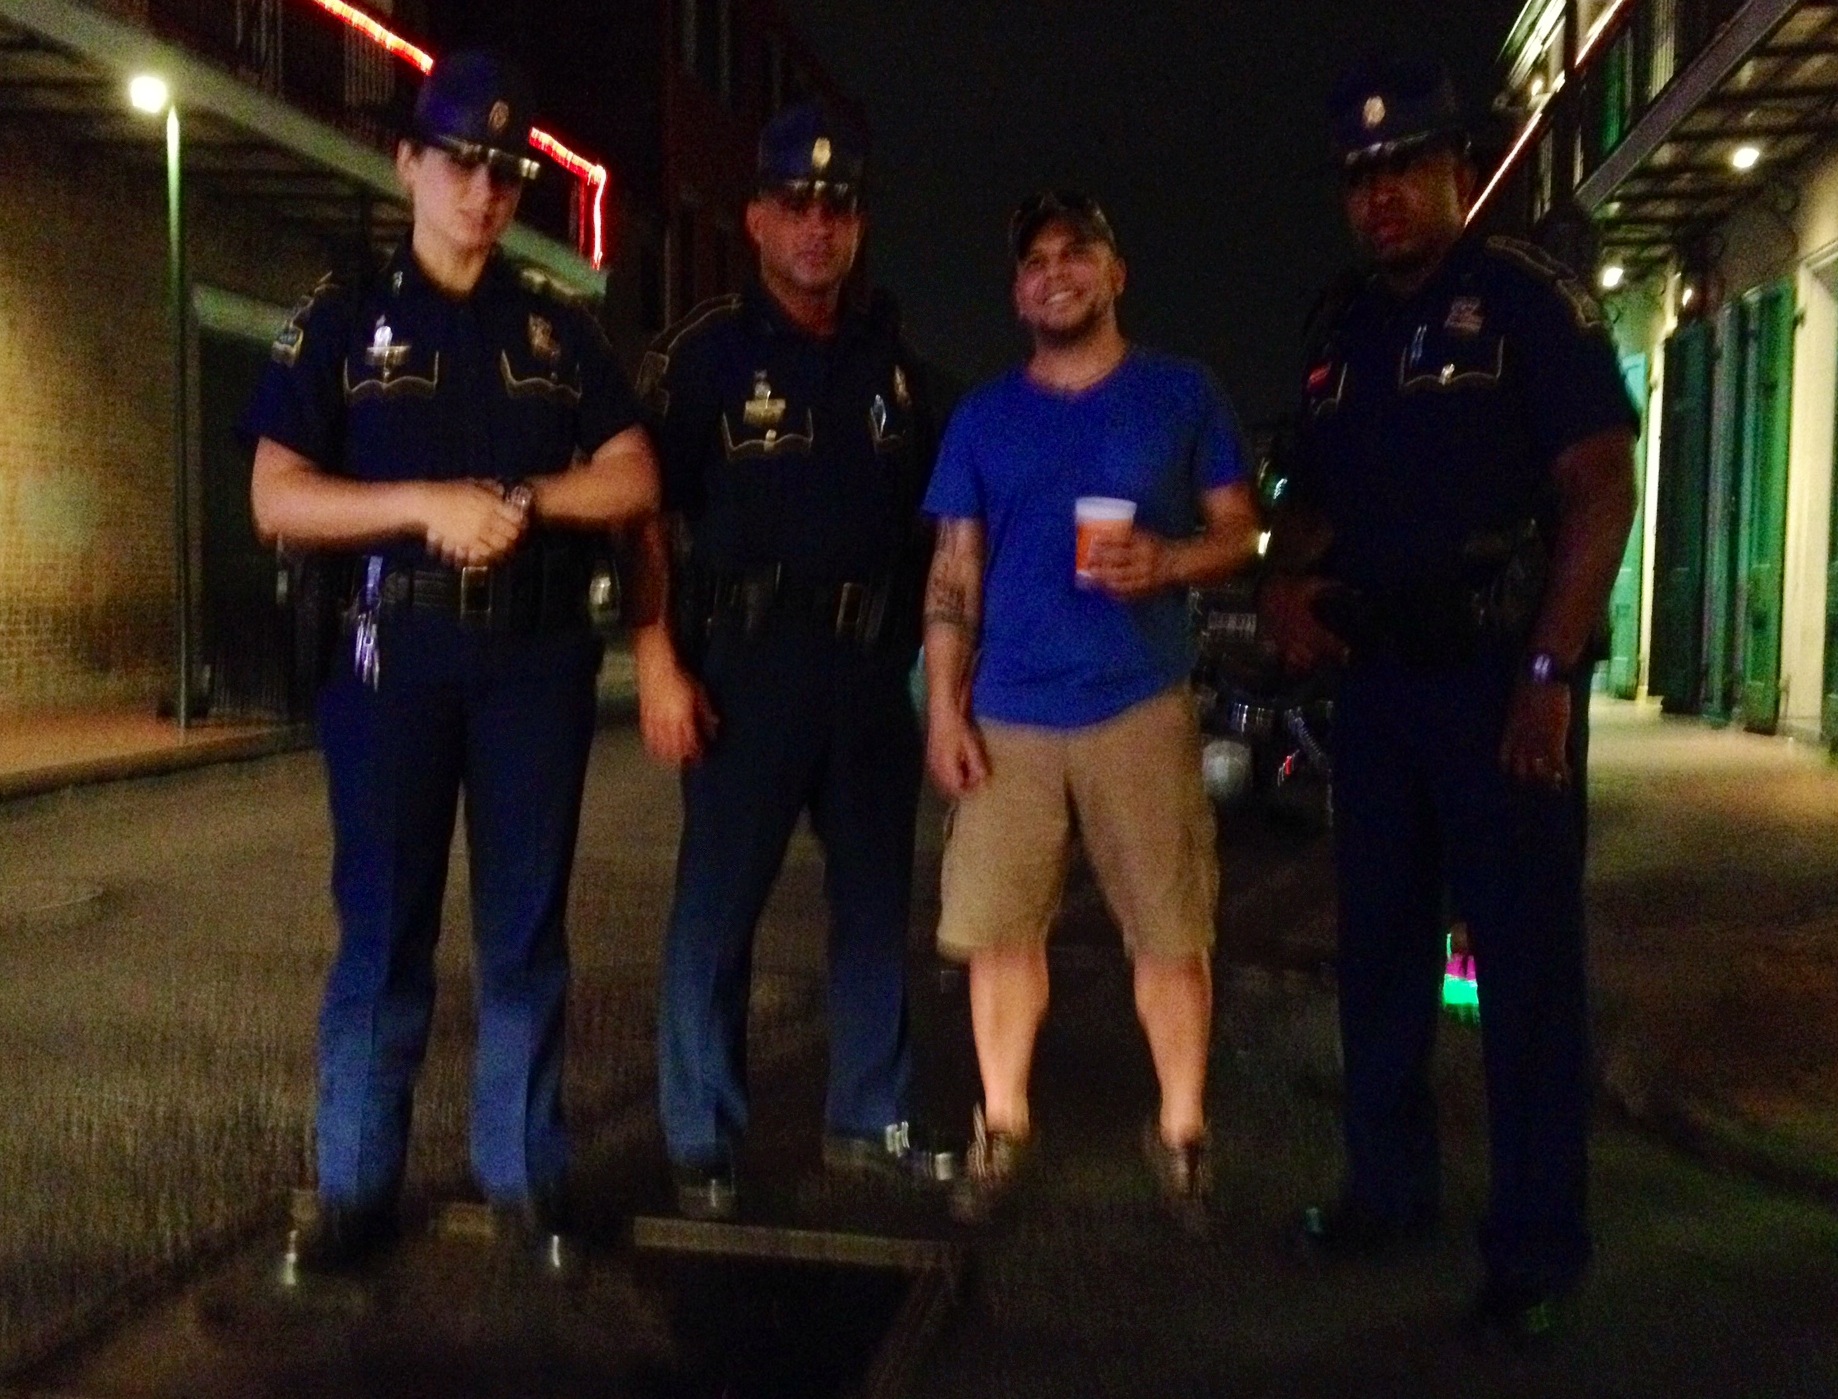 #thestand #police #america #neworleans